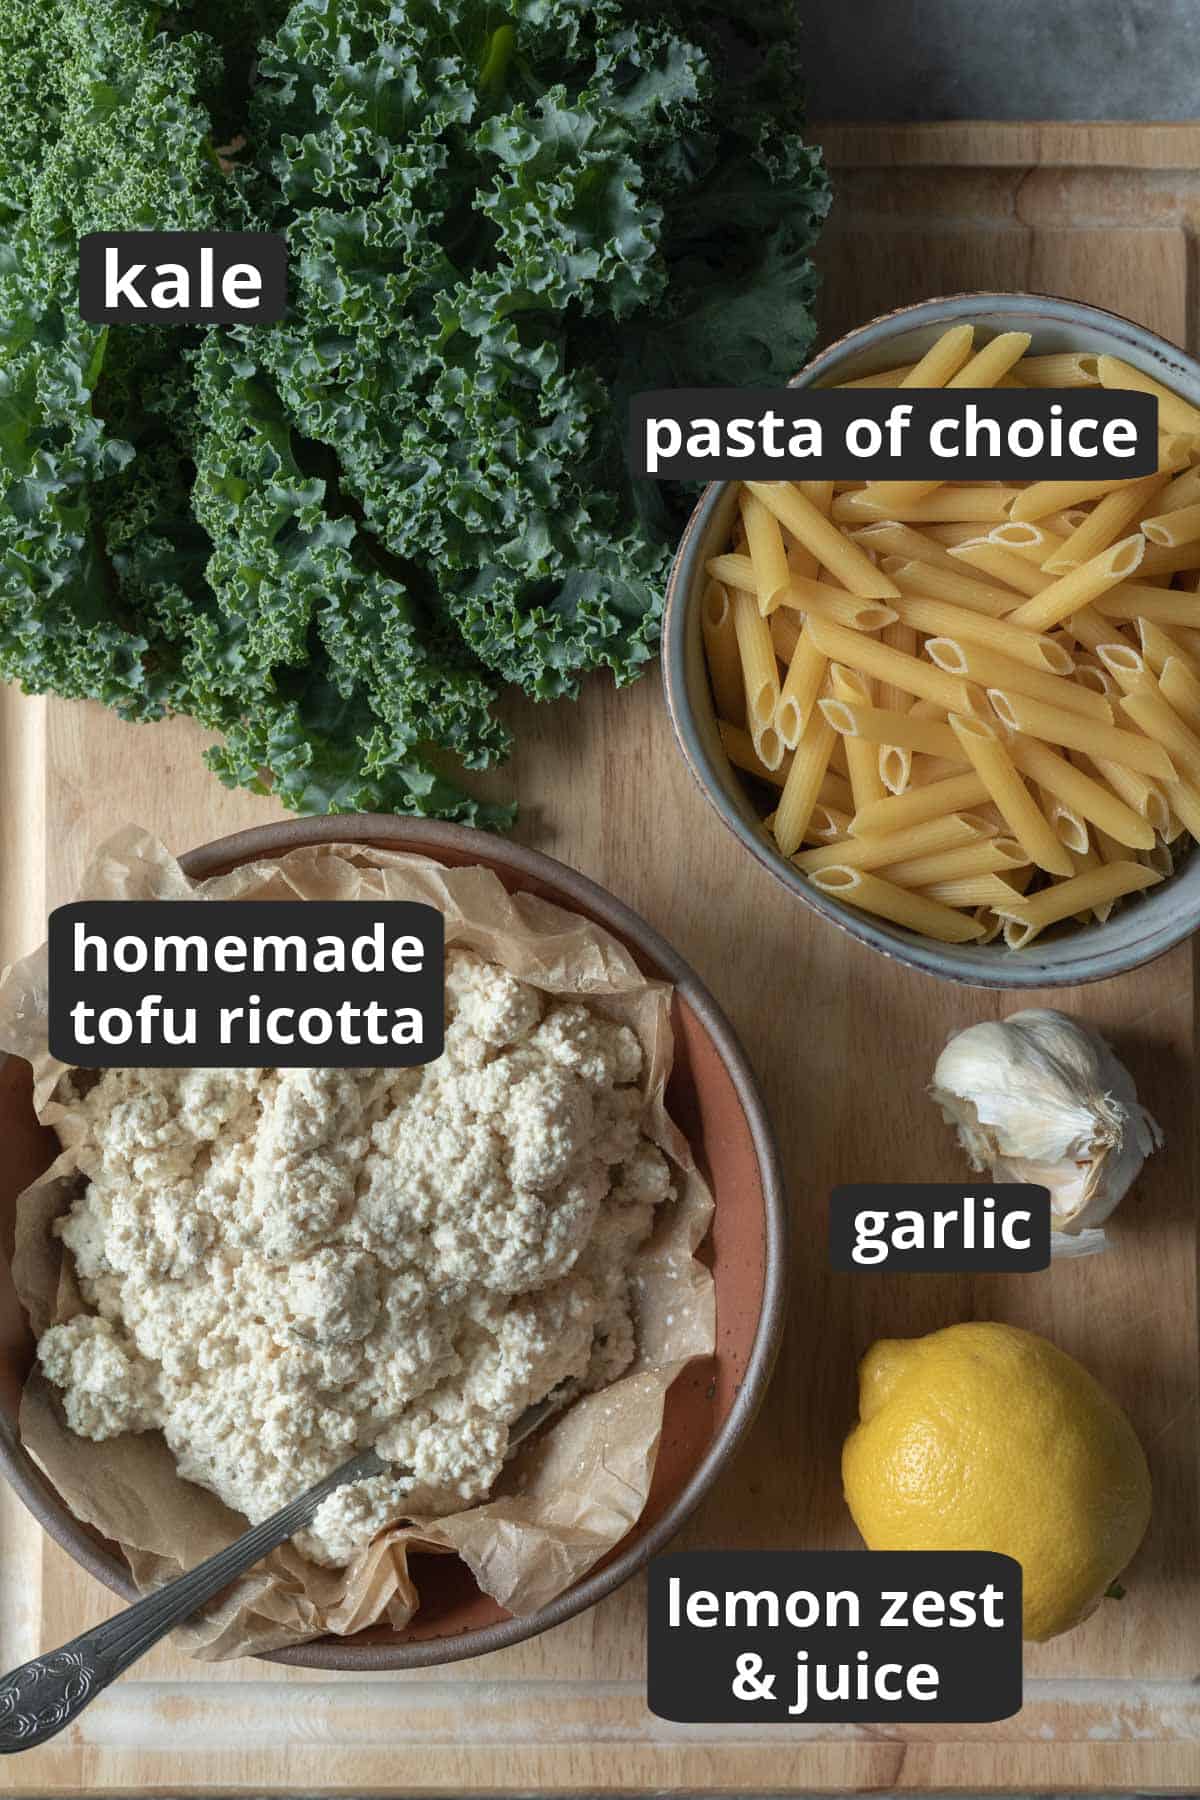 Ingredients on a cutting board: ricotta, kale, dry pasta, lemon and garlic.